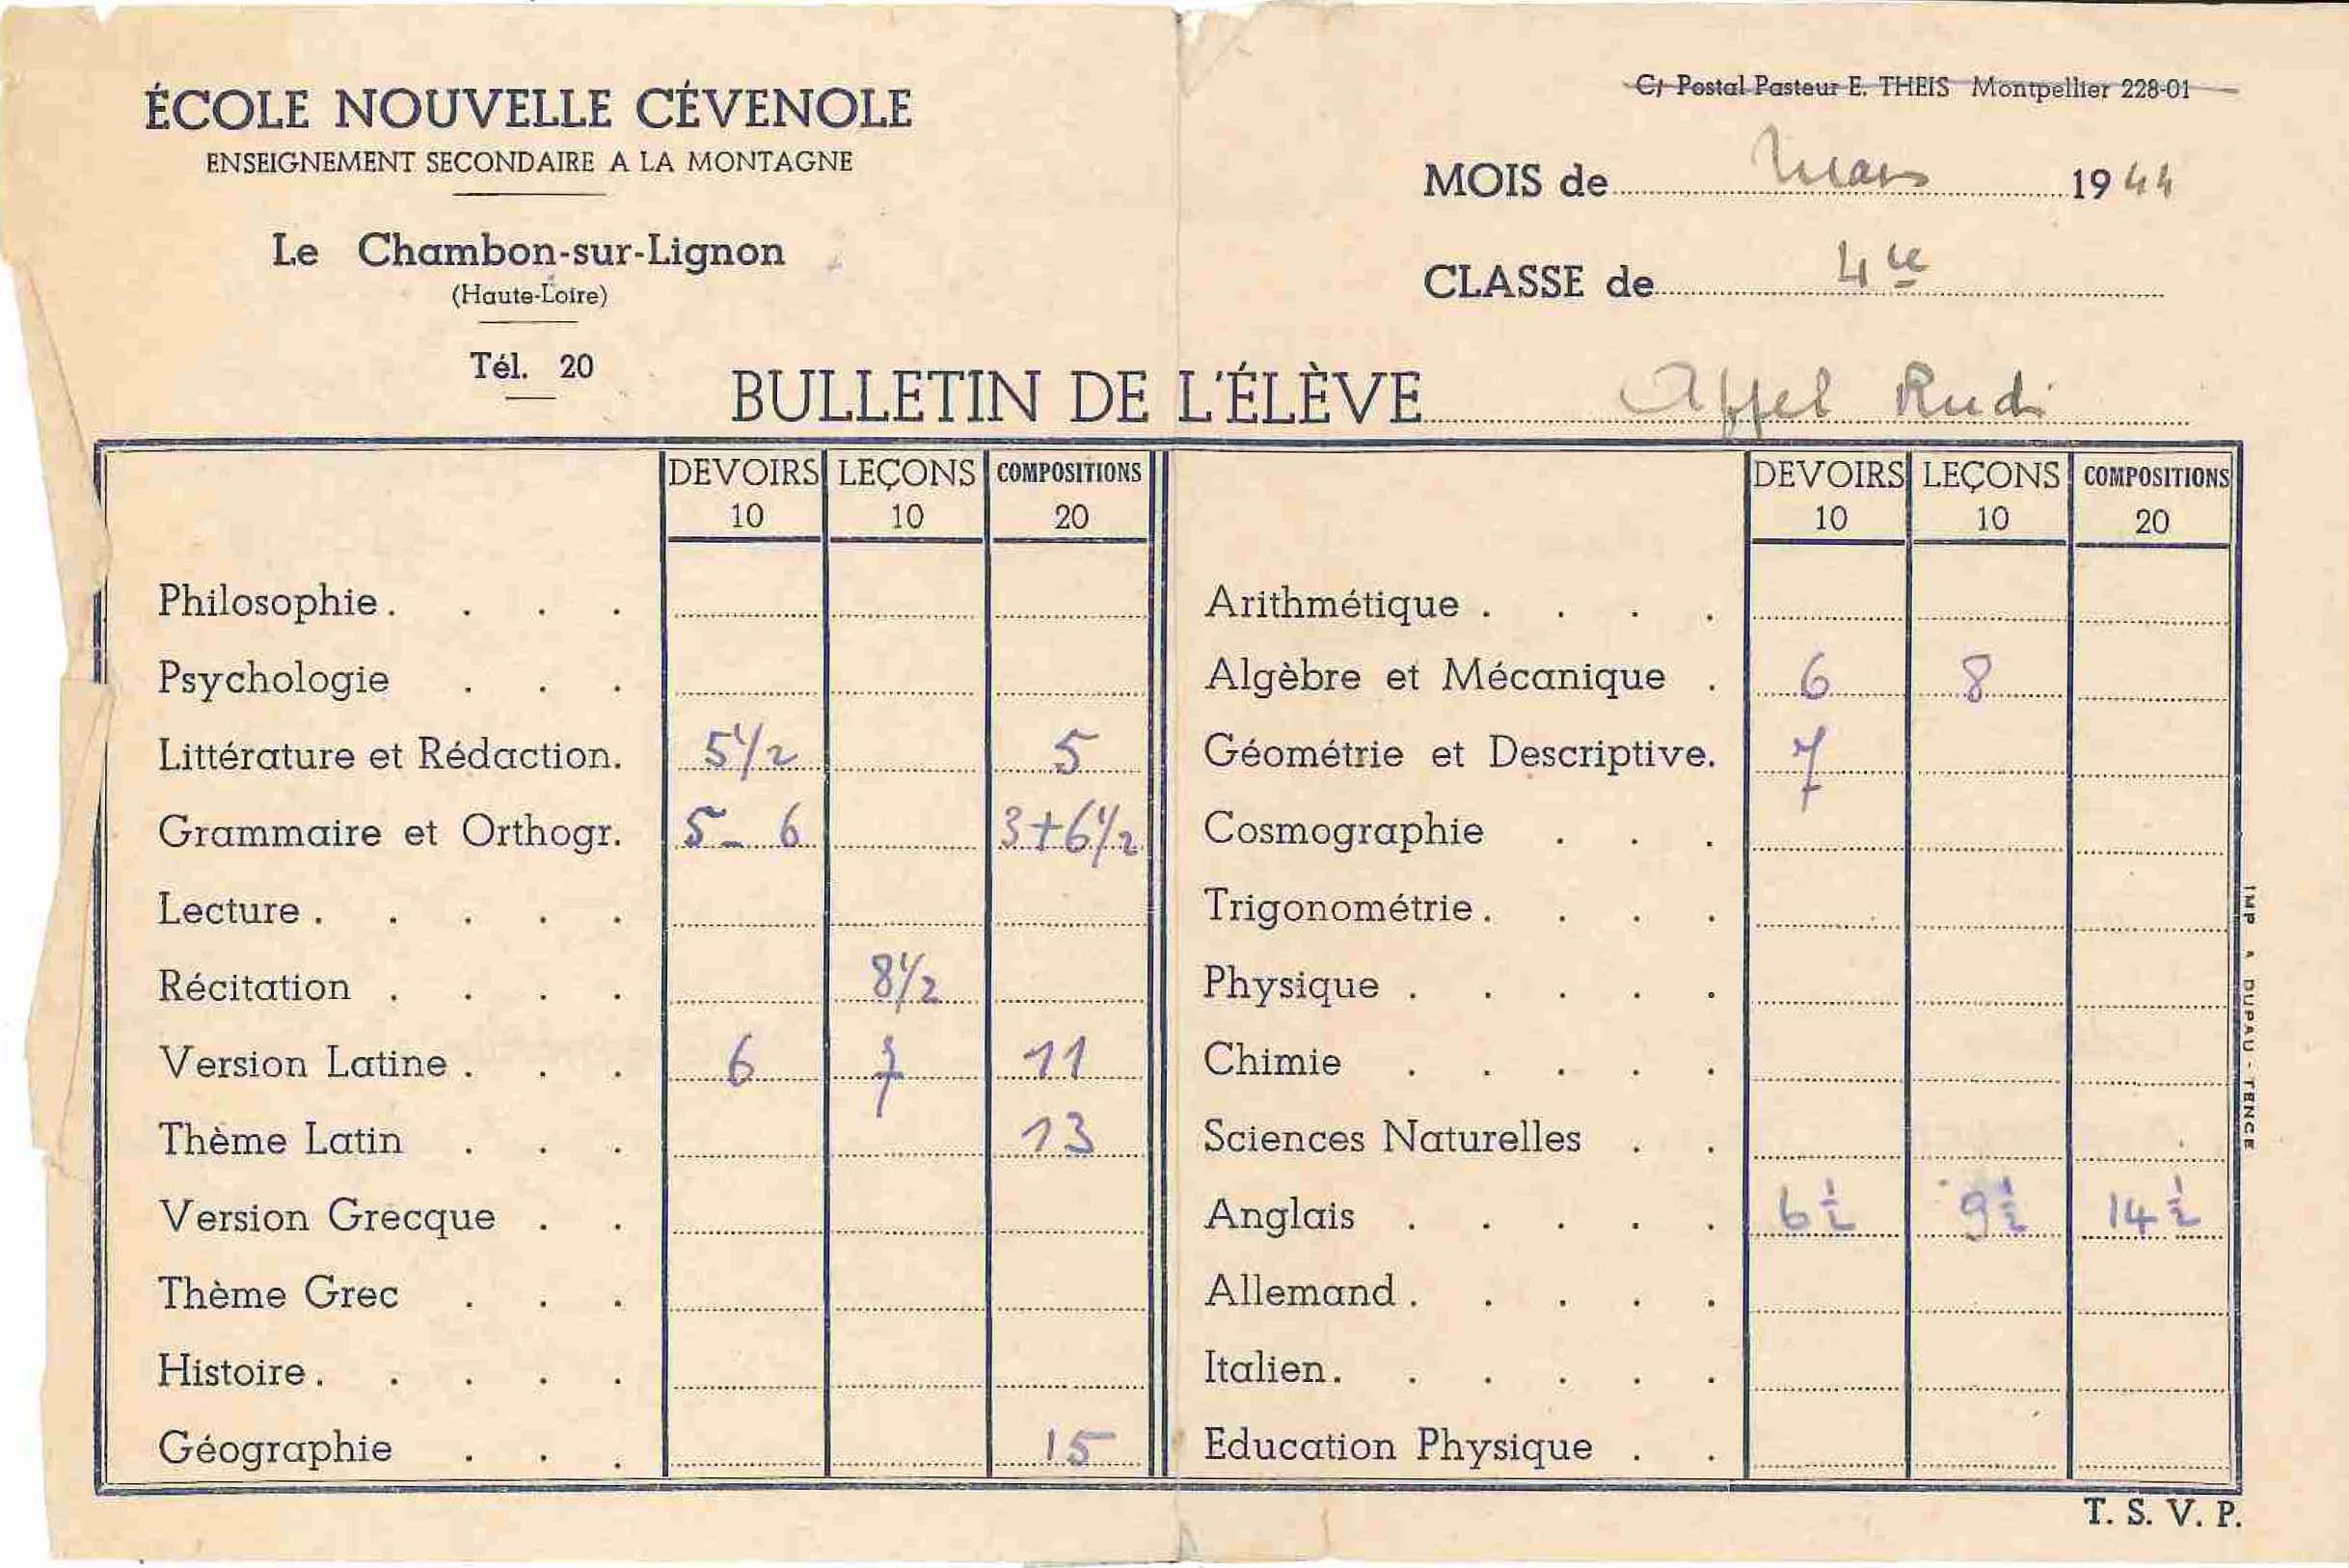 Report card from the Ecole Novelle Cevenole